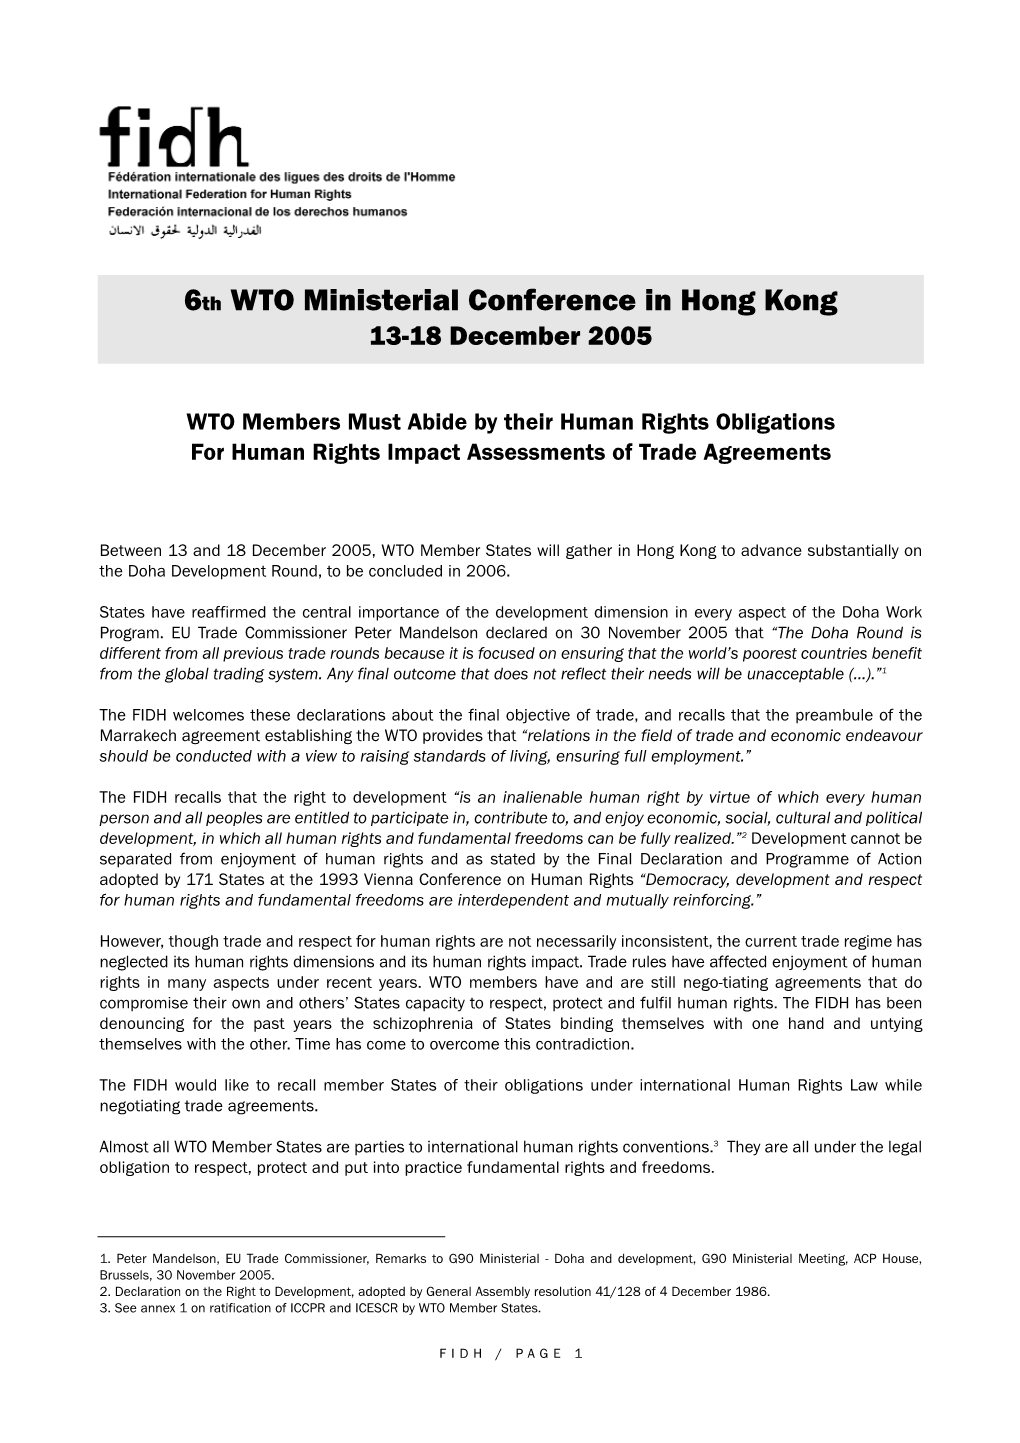 6Th WTO Ministerial Conference in Hong Kong 13-18 December 2005